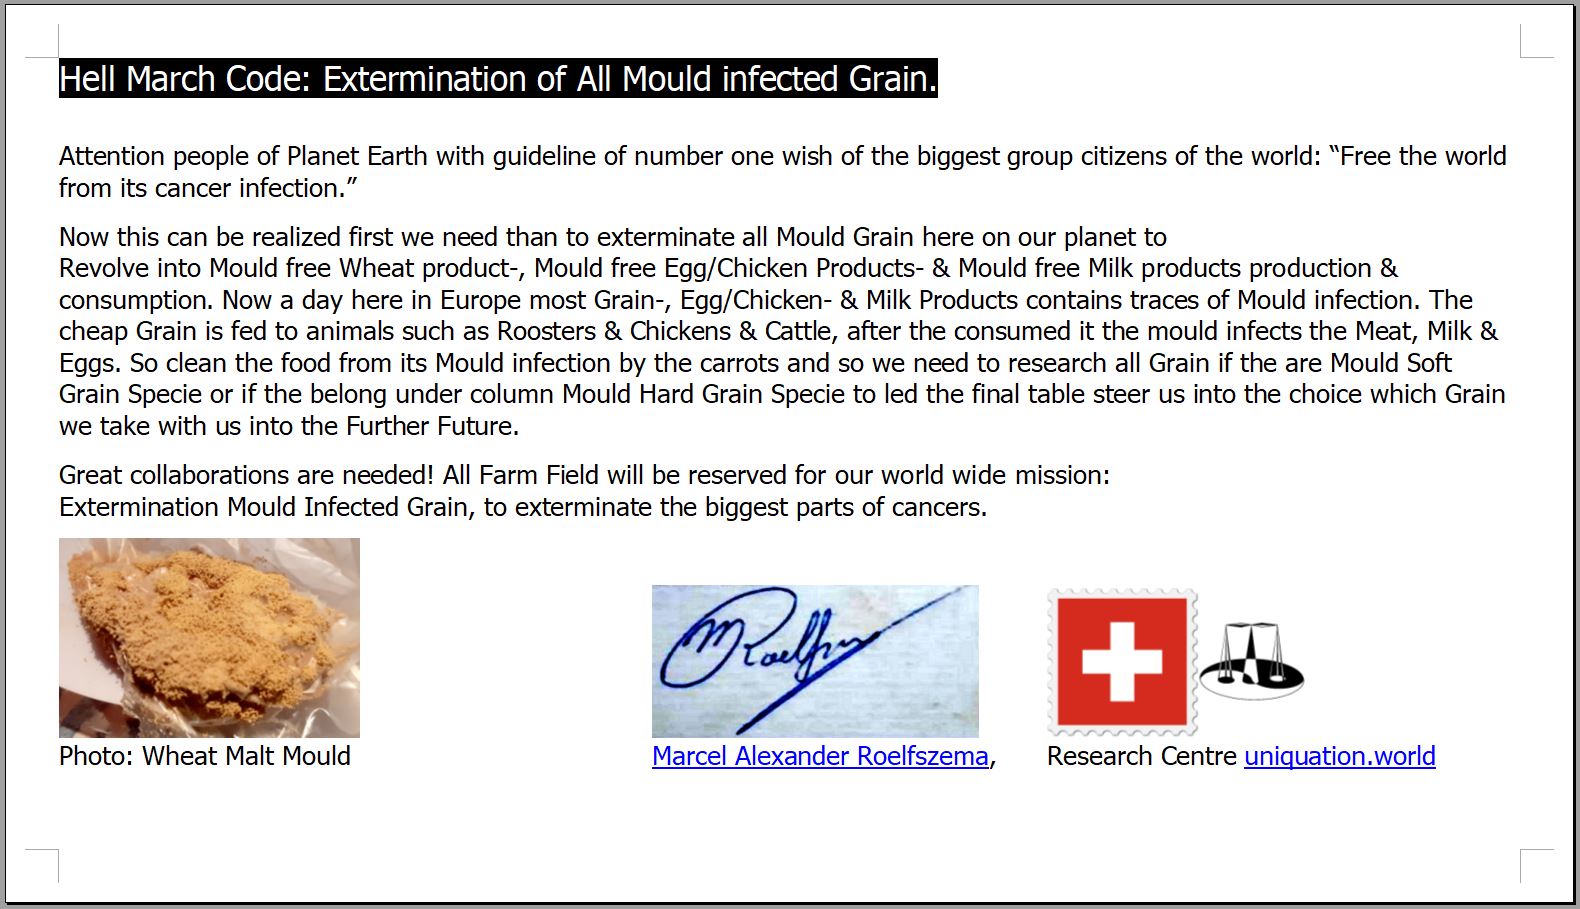 Hell March Code - Extermination of All Mould Infected Grain